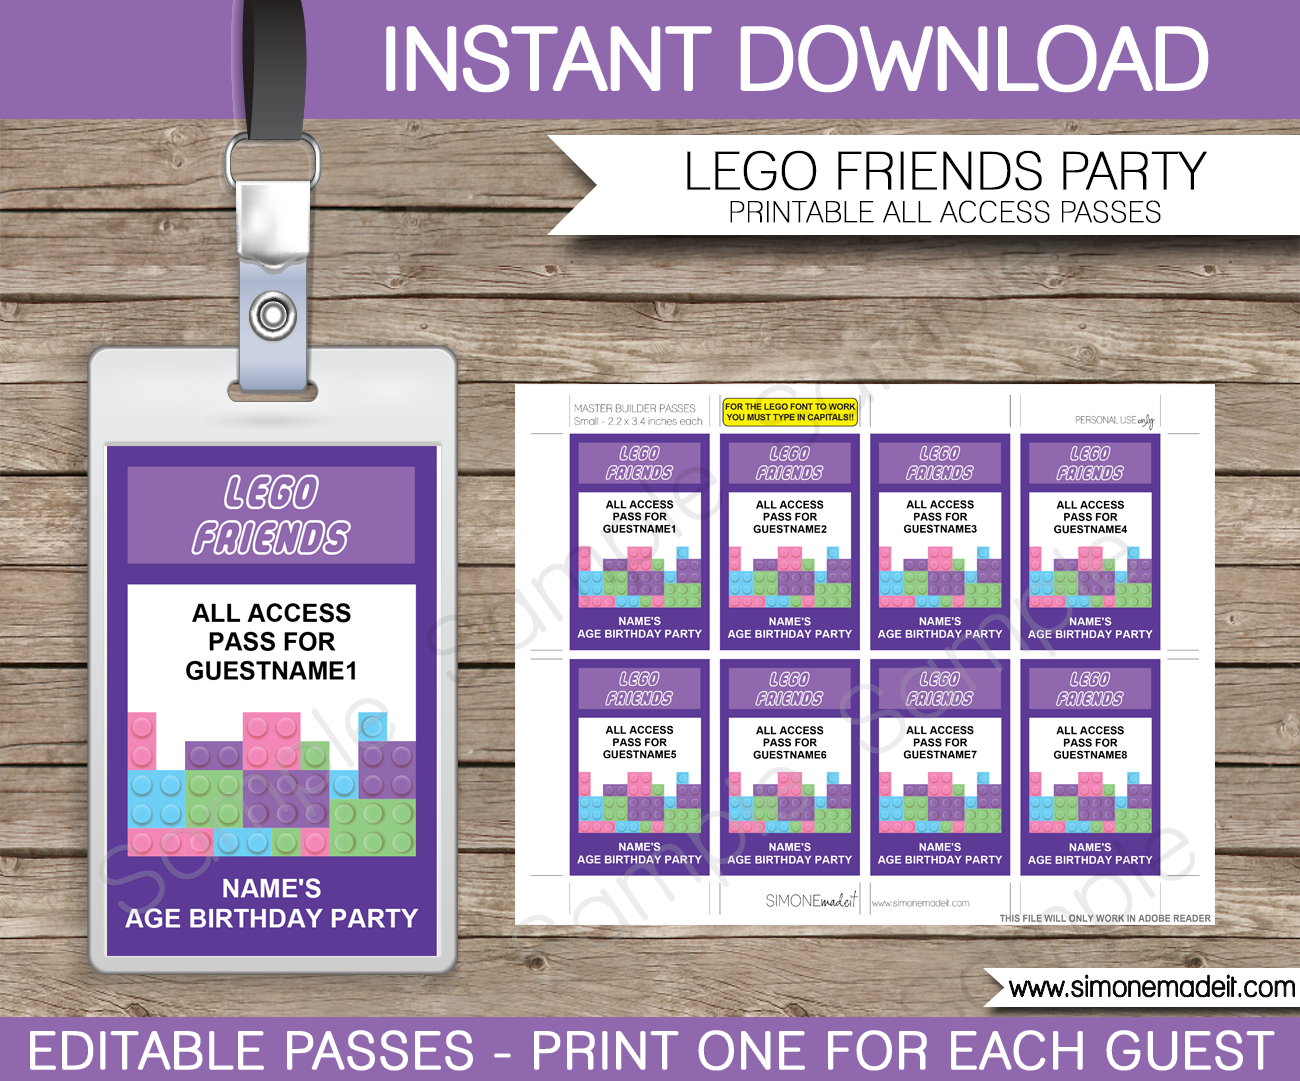 Lego Friends Party Passes | Printable Inserts | All Access Passes | Birthday Party | Editable DIY Template | $3.50 INSTANT DOWNLOAD via SIMONEmadeit.com